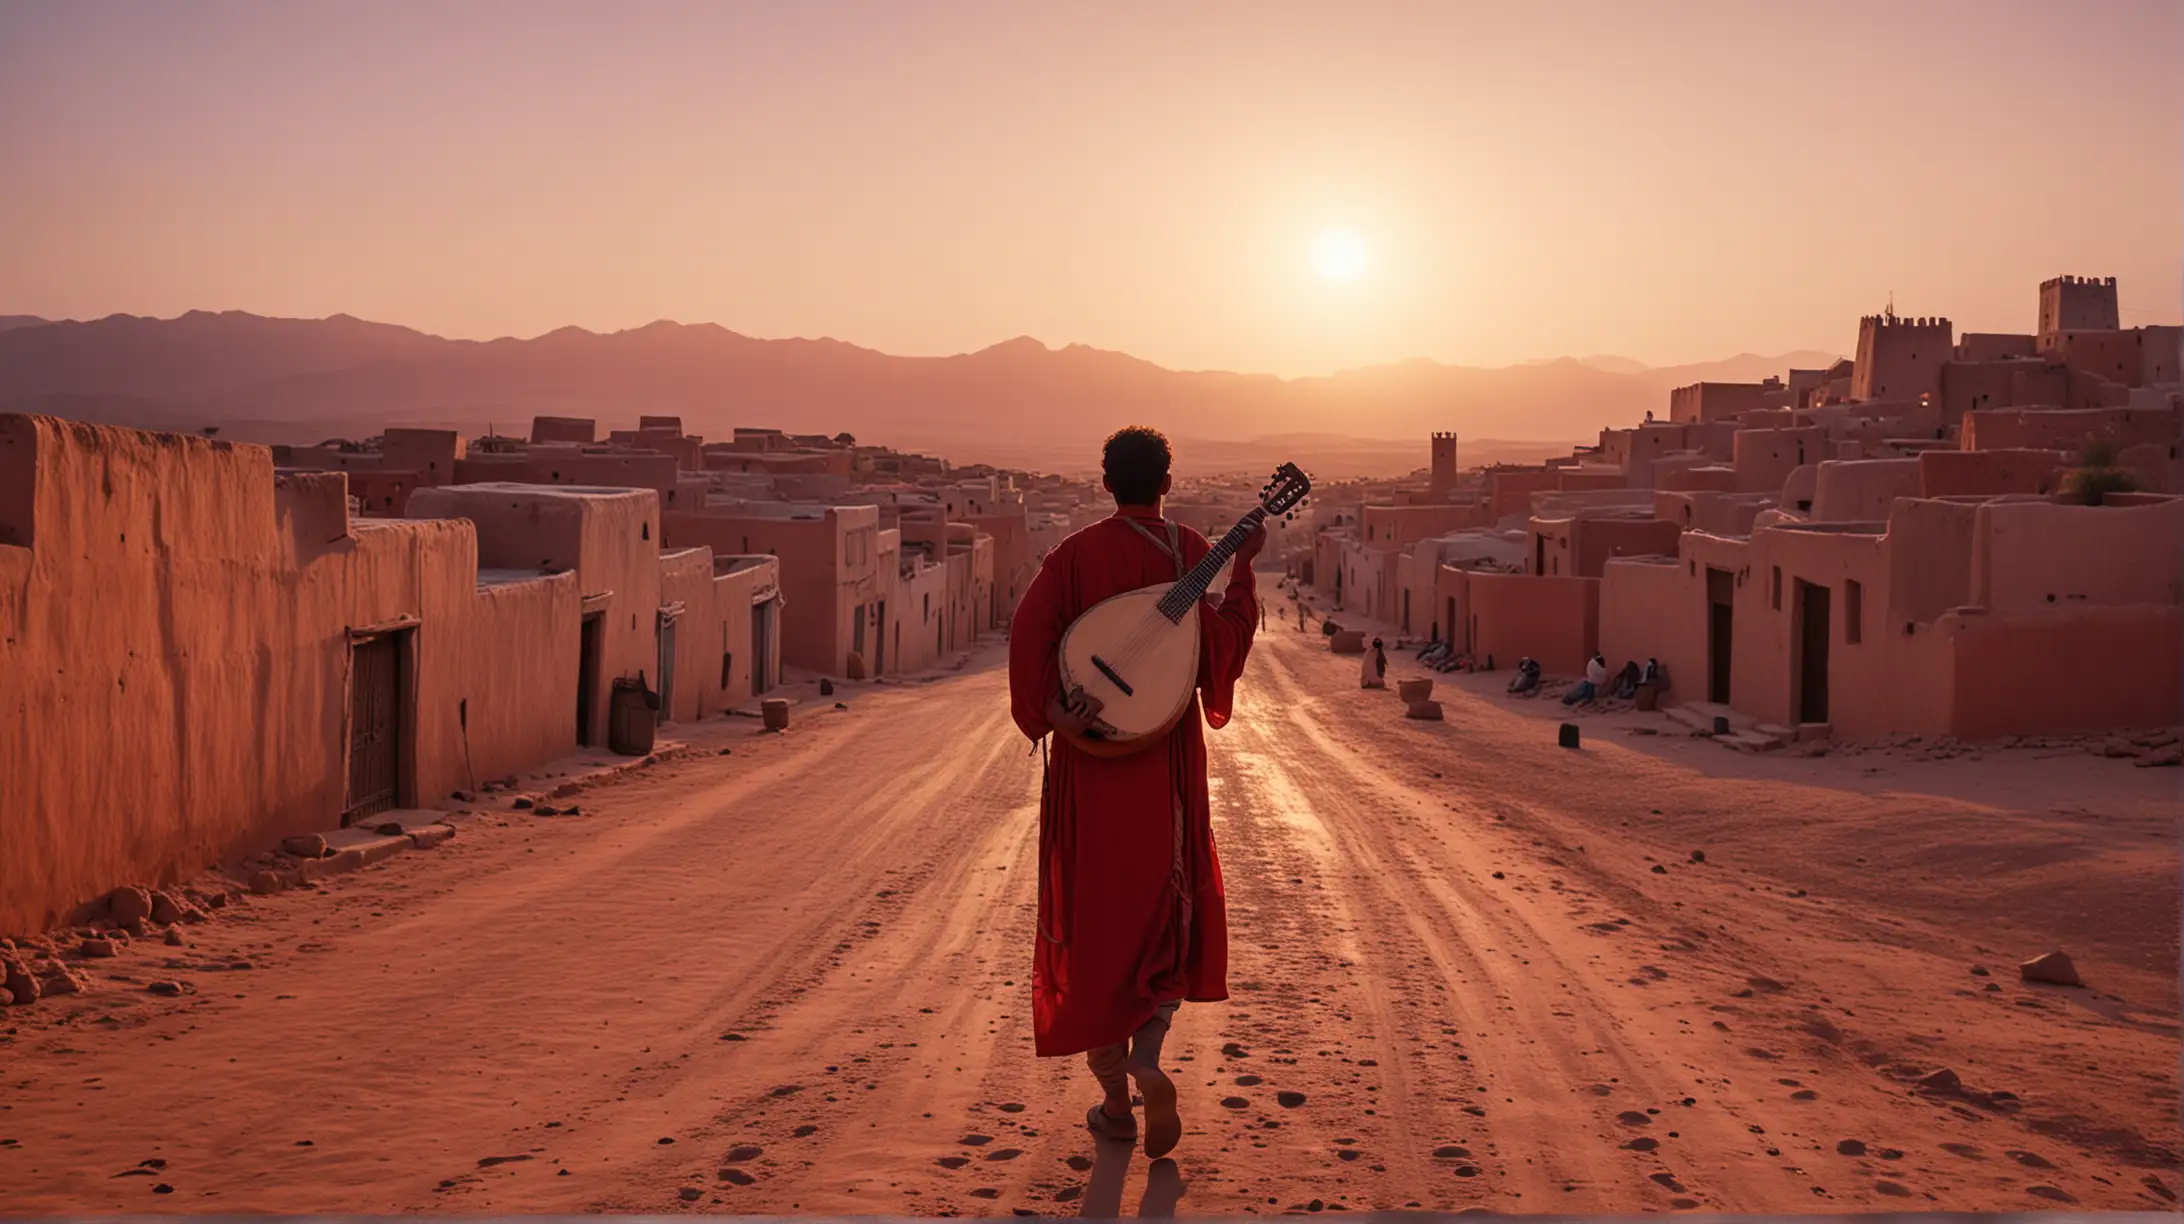 lonely Moroccan musician, his lute on his shoulders, entering  a traditional Moroccan village, deep red sunset, cinematic